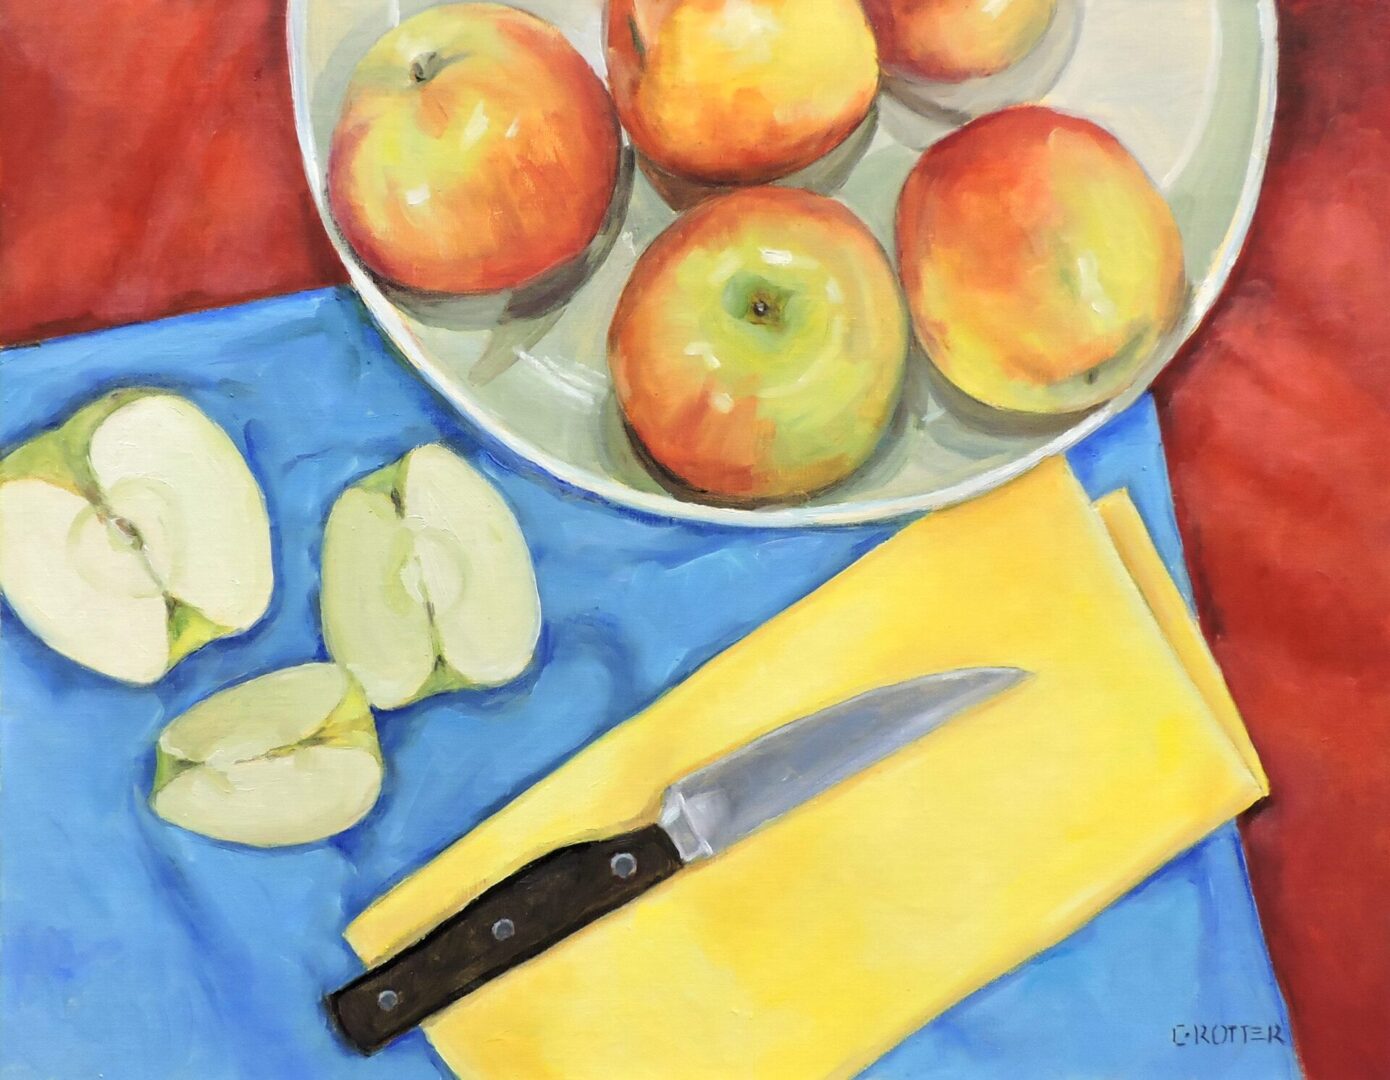 A view of apples, a knife, and a cutting board